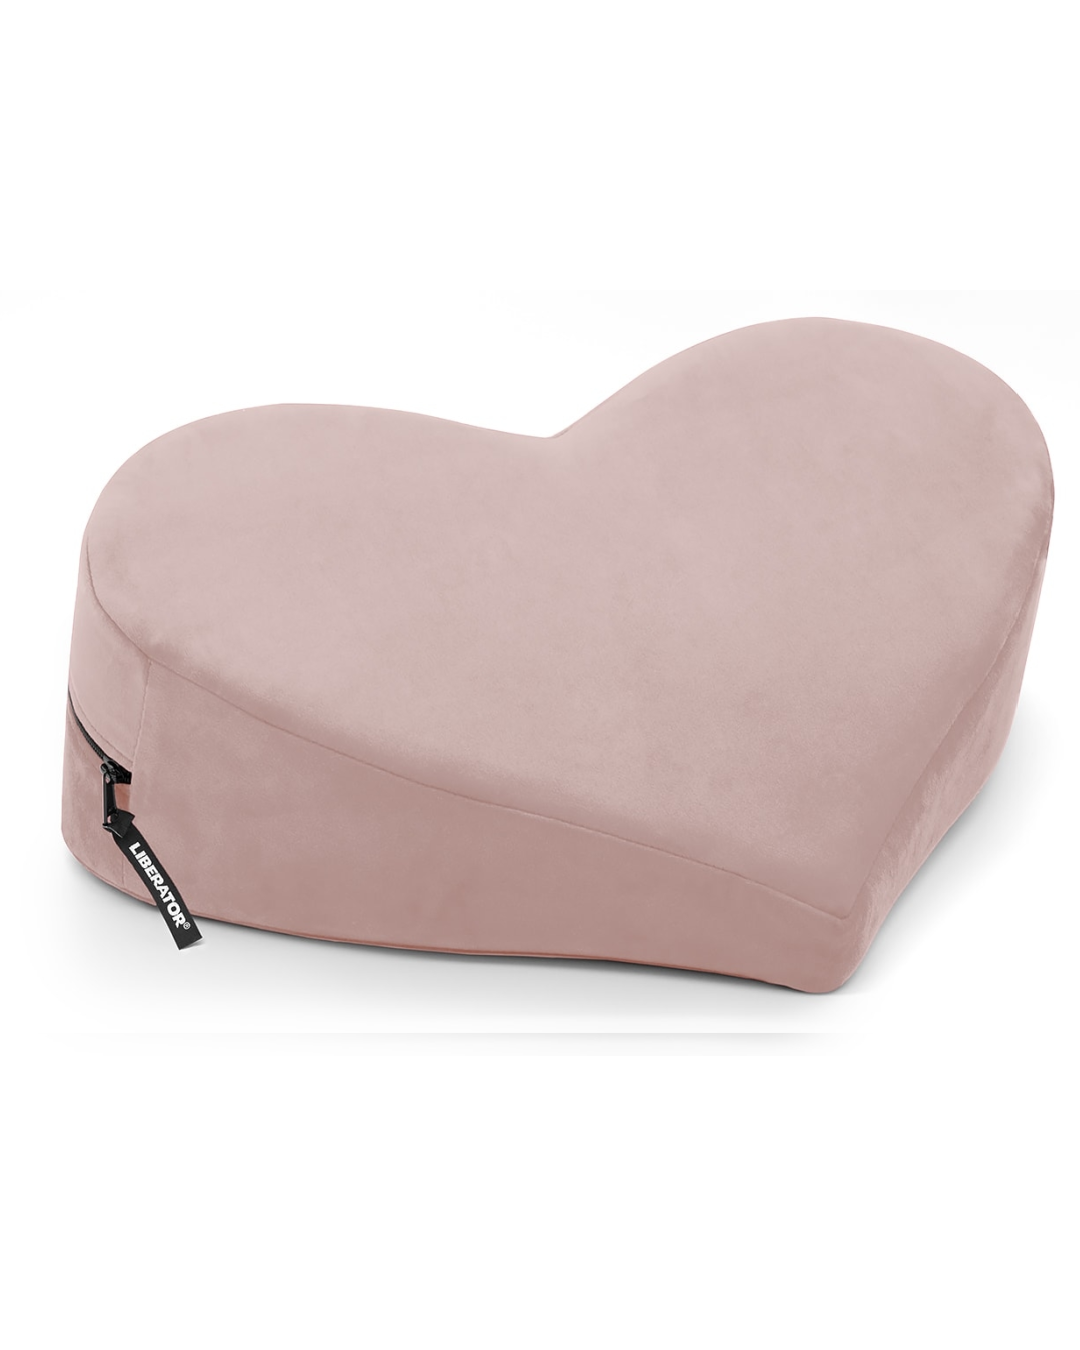 Liberator Heart Wedge Sex Positioning Cushion - Assorted Colors